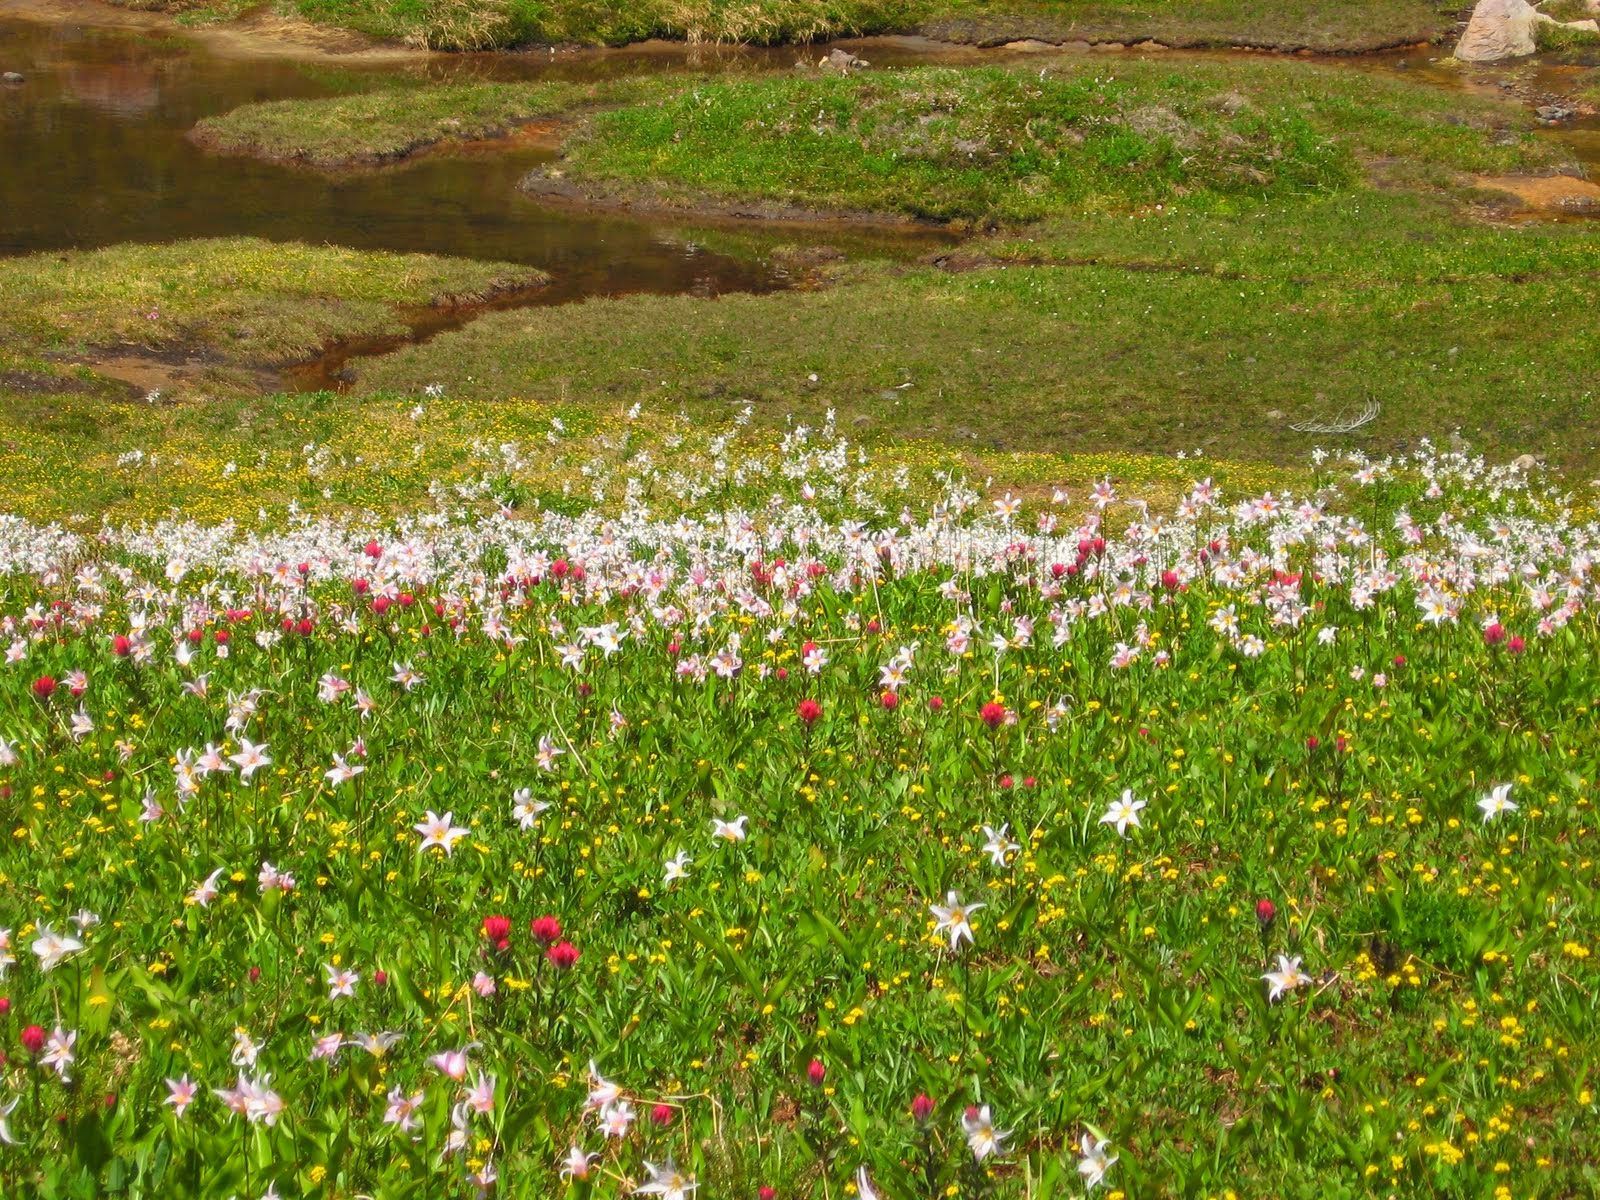 Lots of white, magenta and yellow wildflowers in a green meadow